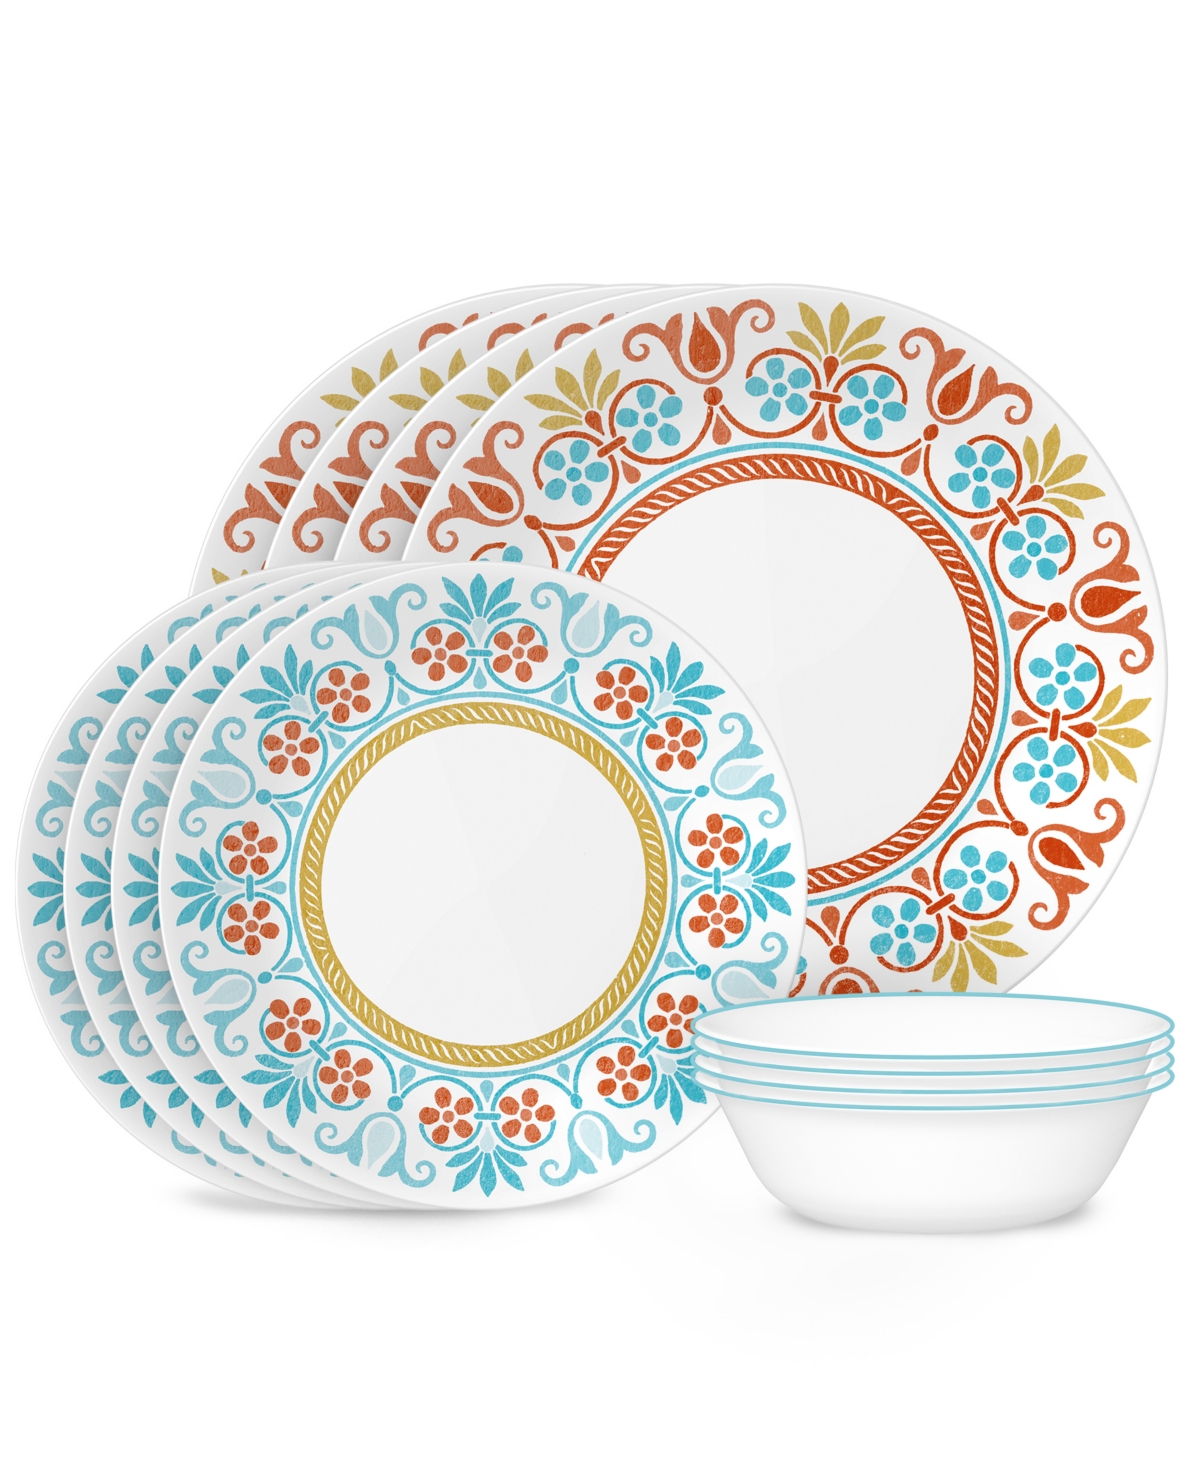 Global Collection, Terracotta Dreams, 12-Piece Dinnerware Set, Service for 4 - Vibrant Teal, Muted Yellow, Terracotta O